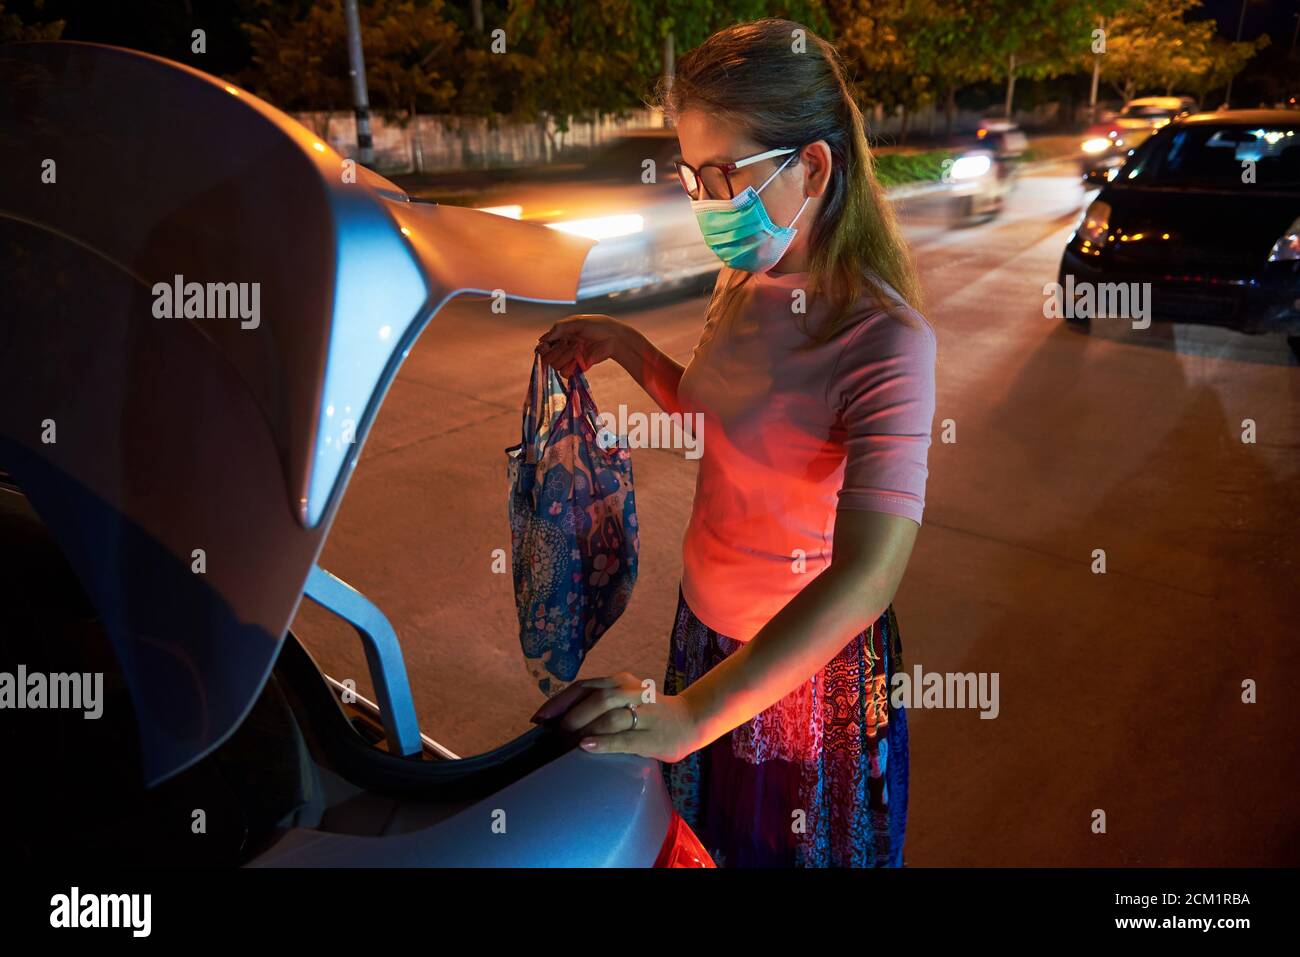 A woman put her belonging to the car trunk after shopping during COVID Stock Photo